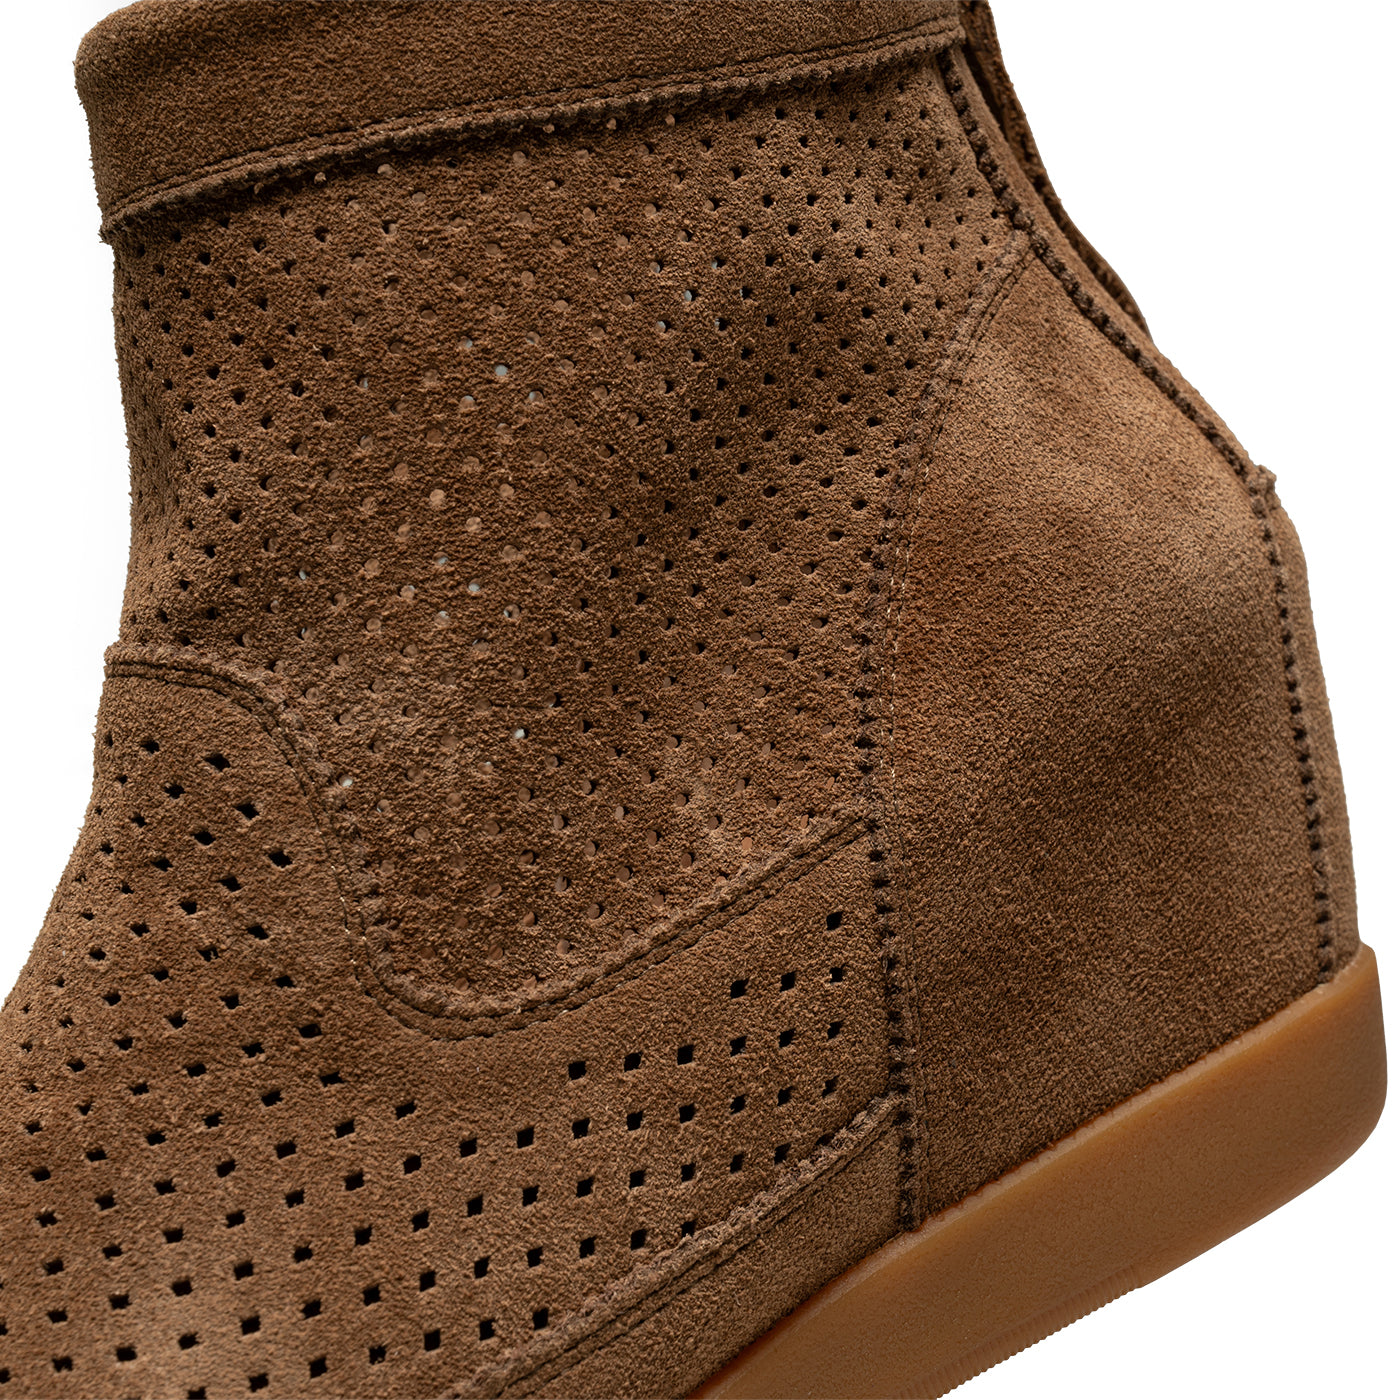 SHOE THE BEAR WOMENS Emmy with perforations Wedge 135 TAN